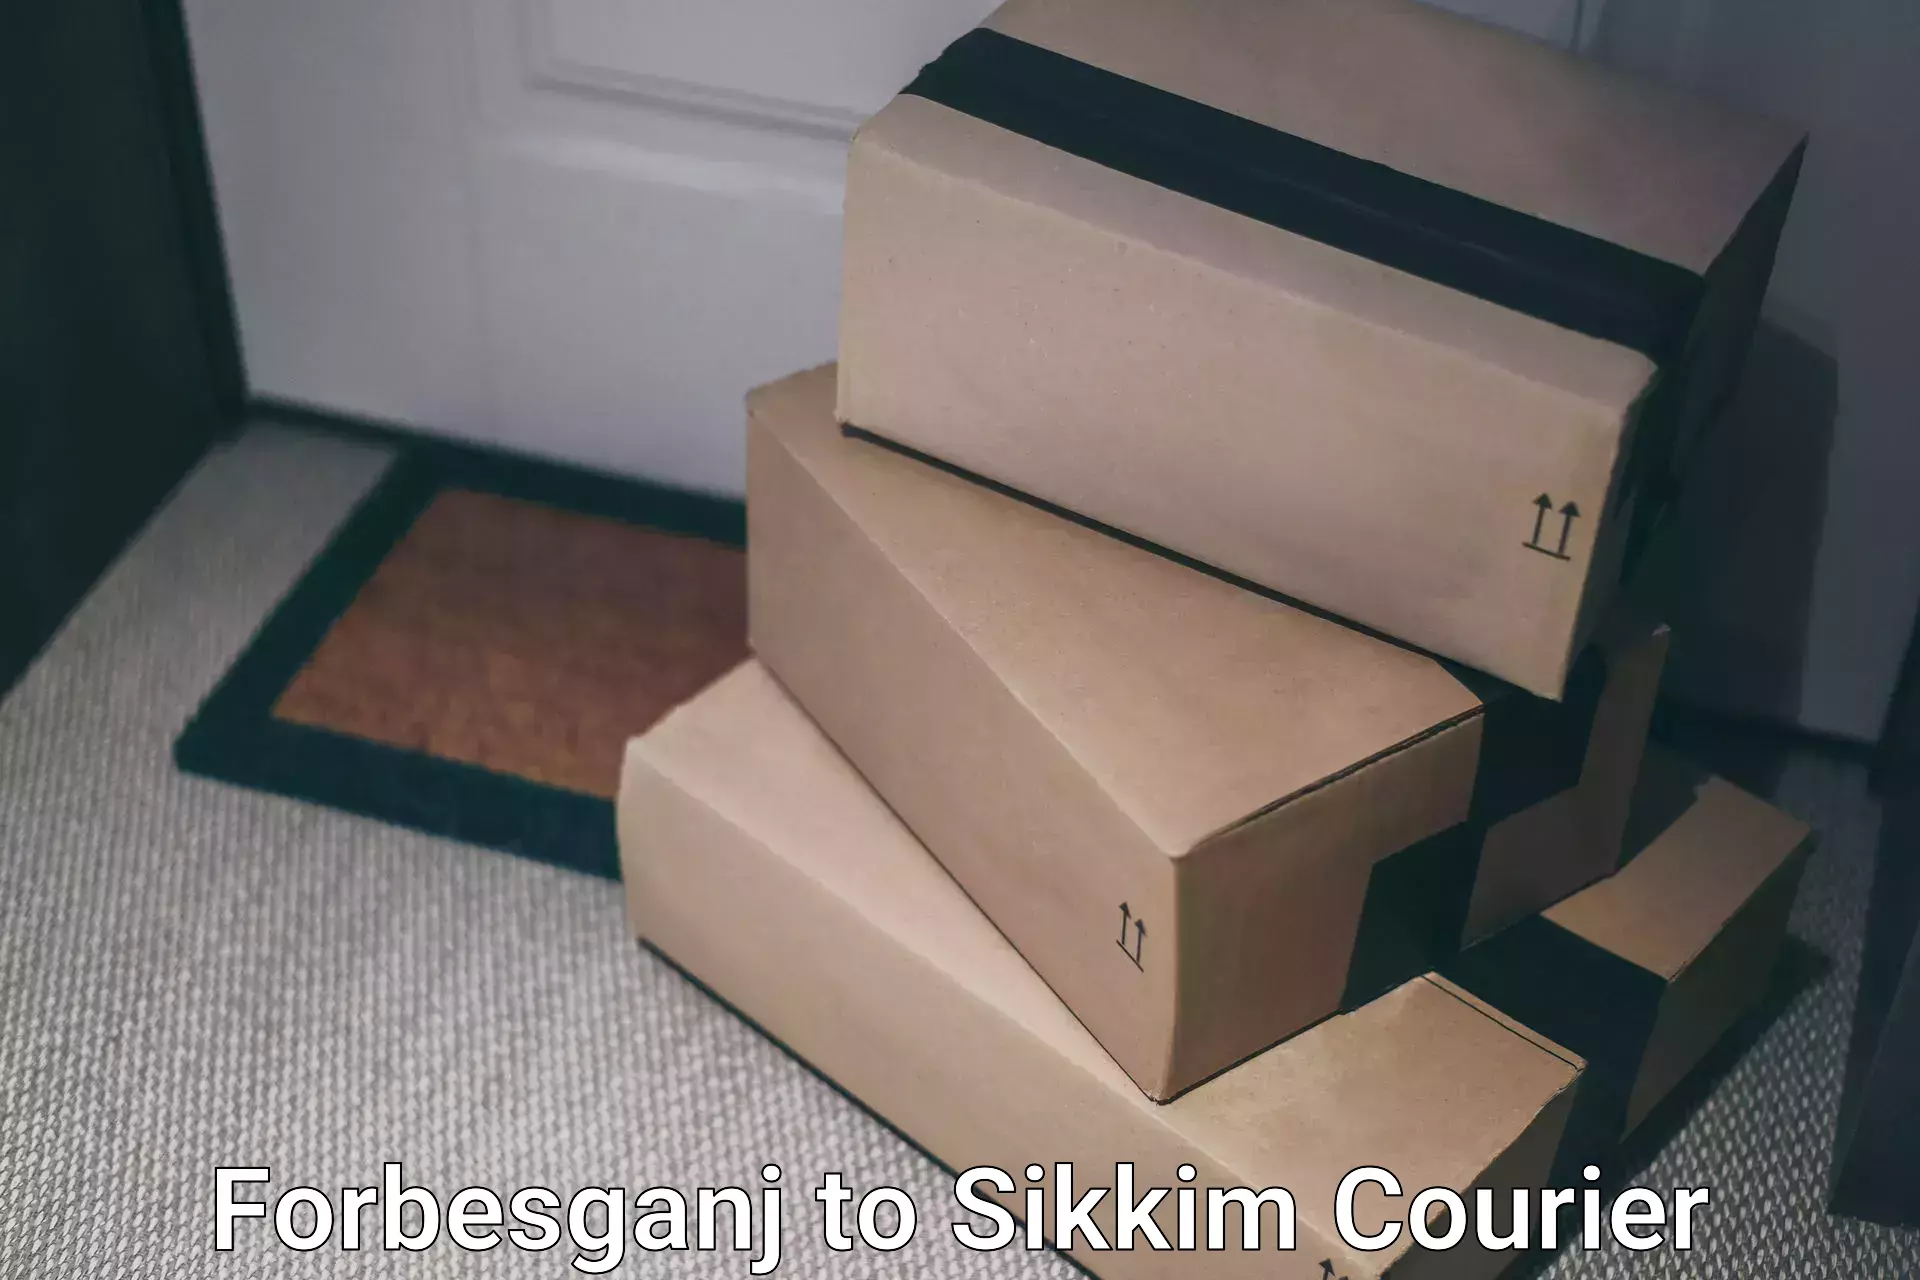 Parcel handling and care in Forbesganj to Sikkim